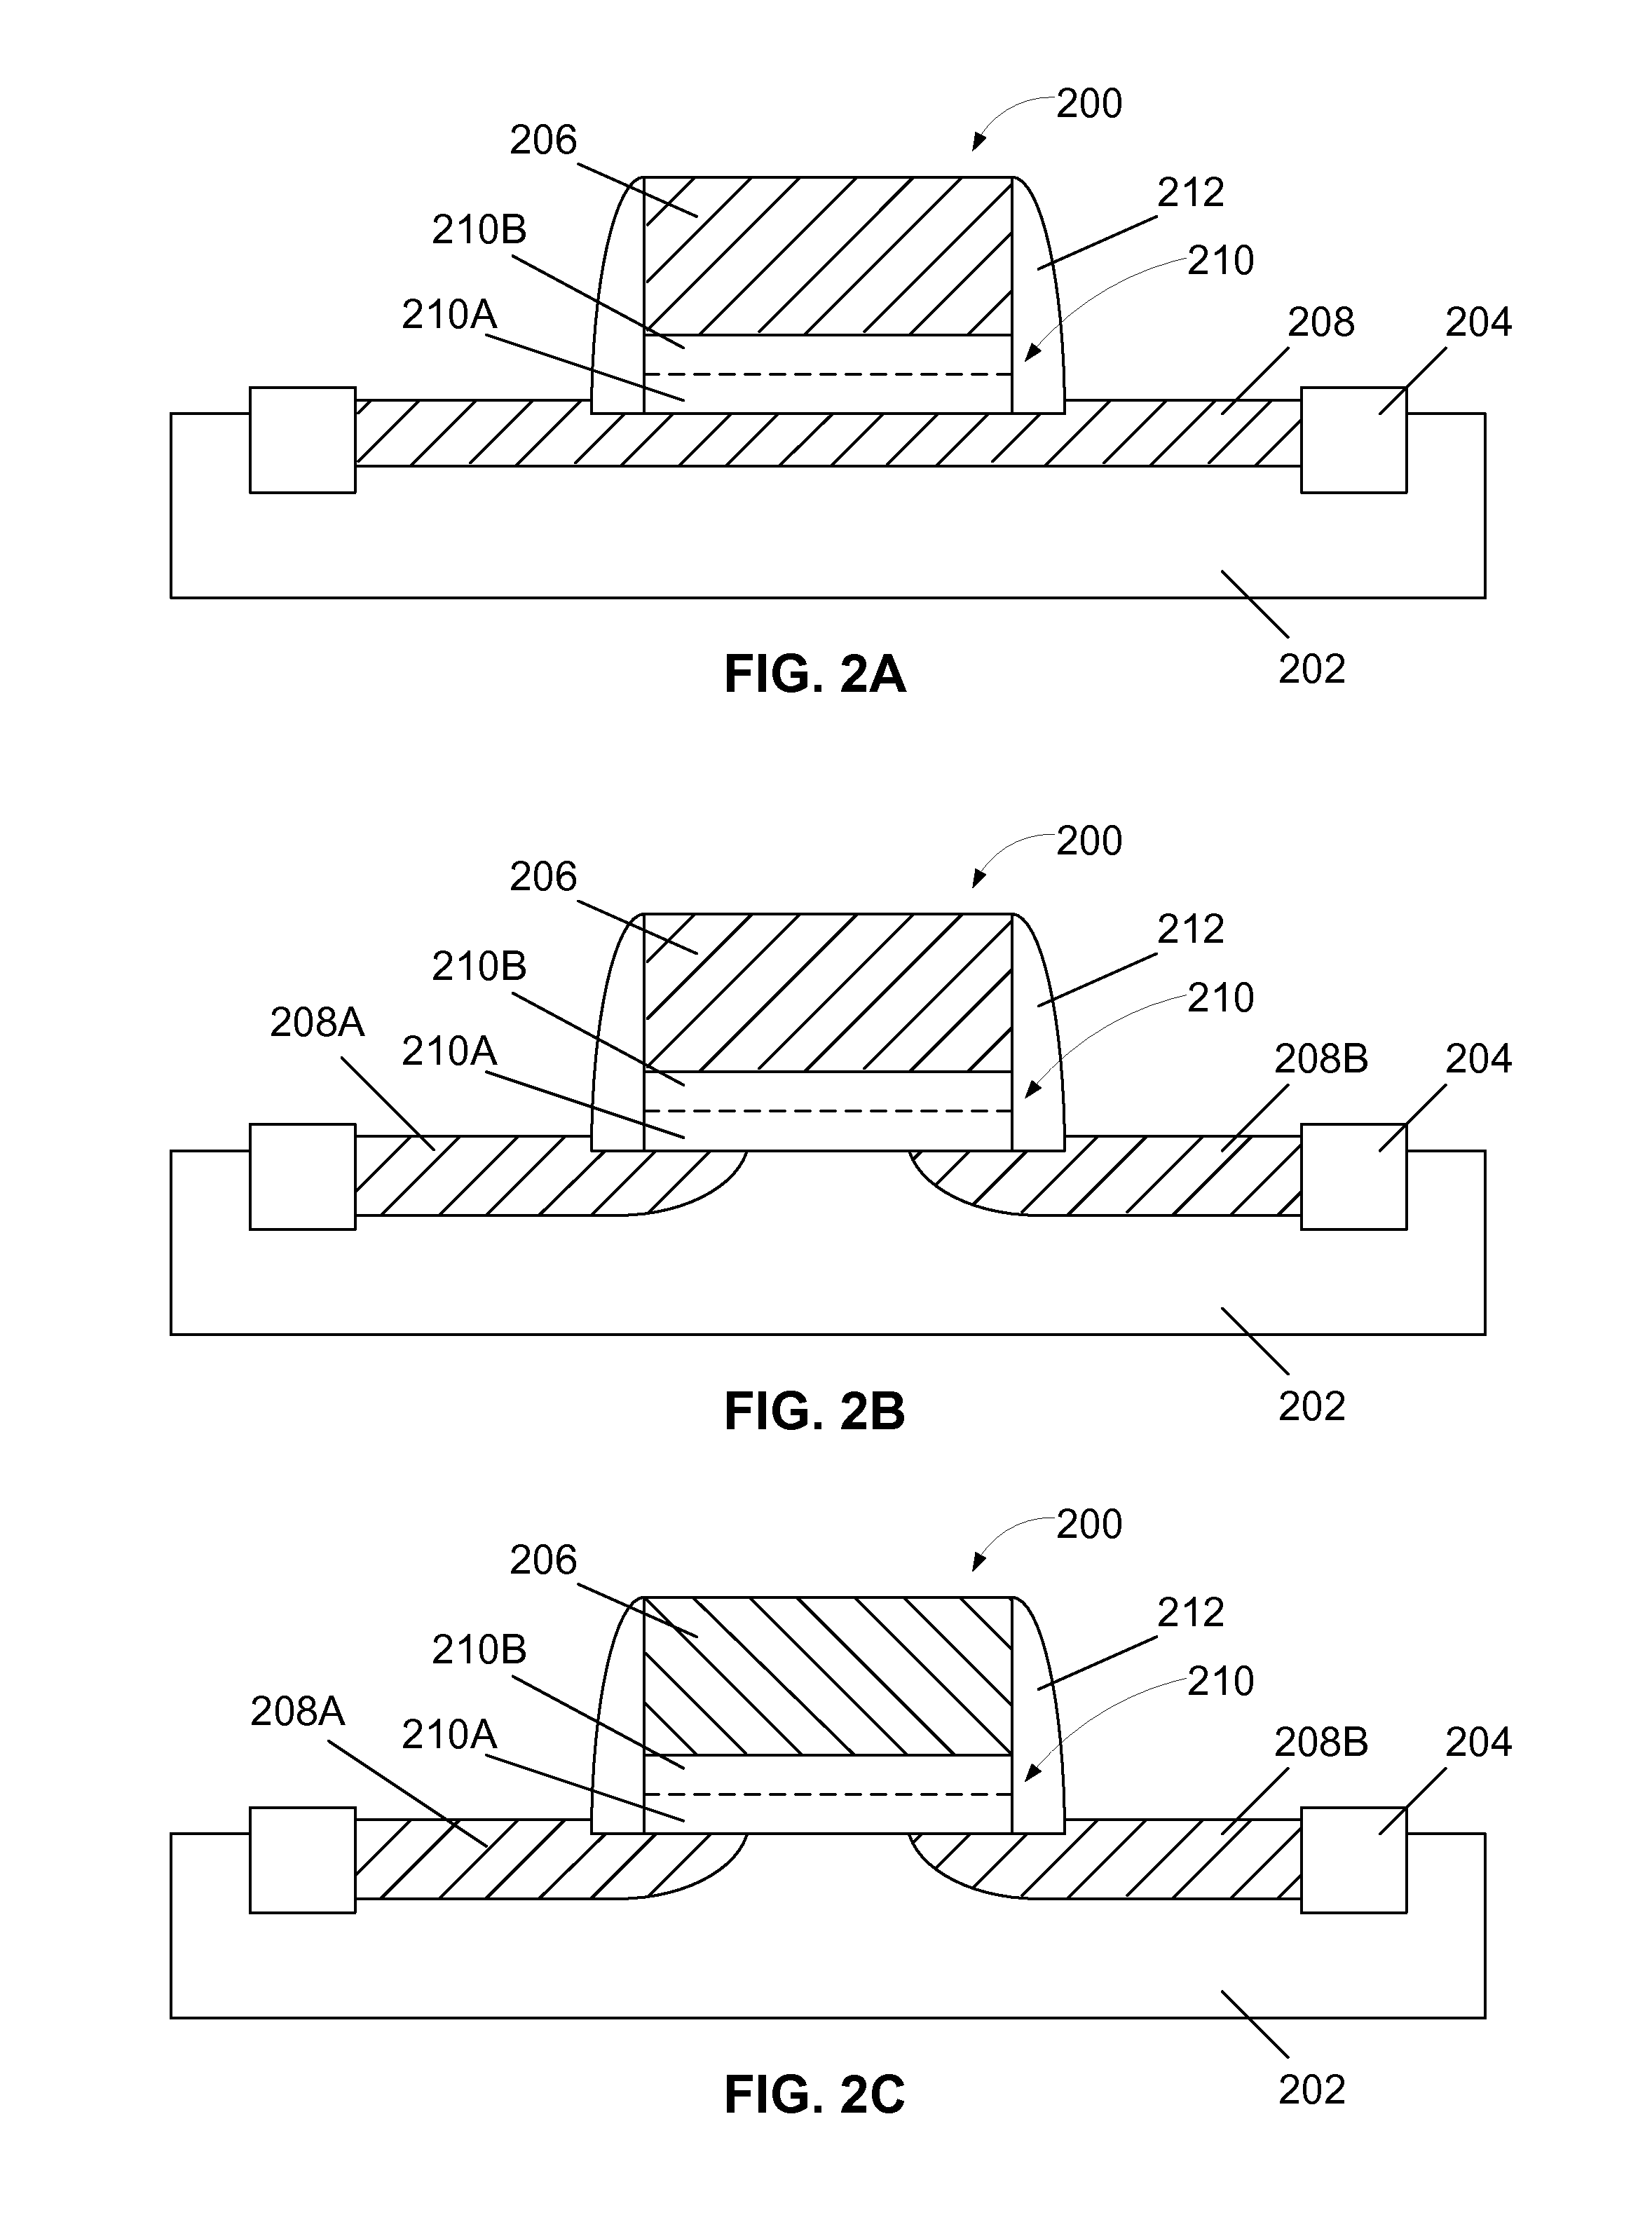 Fabrication of RRAM Cell Using CMOS Compatible Processes